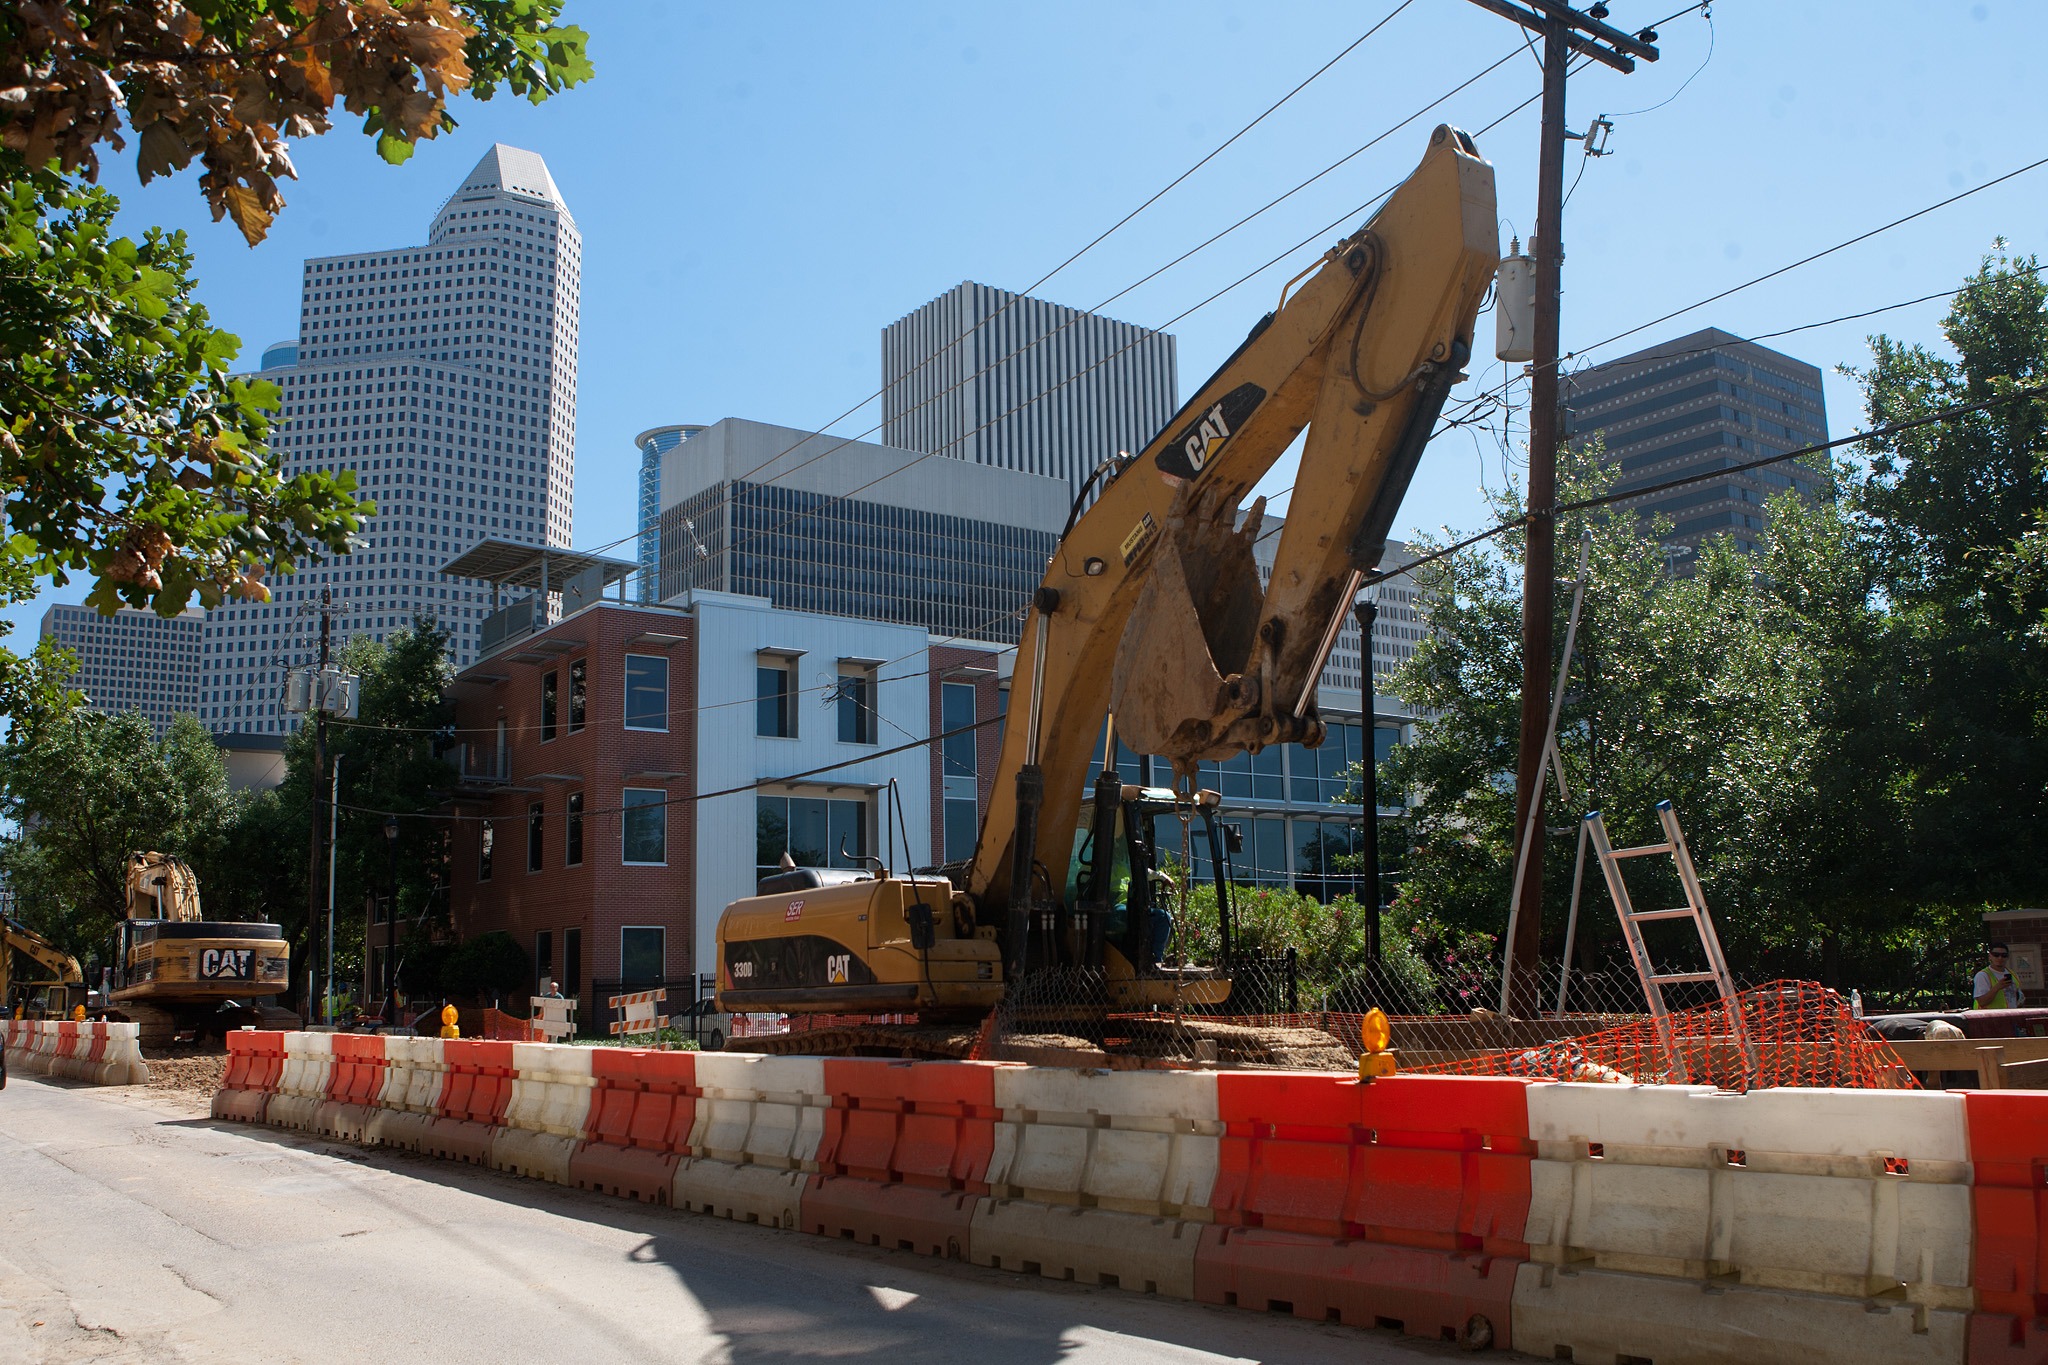 Road project slows traffic on Bagby segment - Houston Chronicle